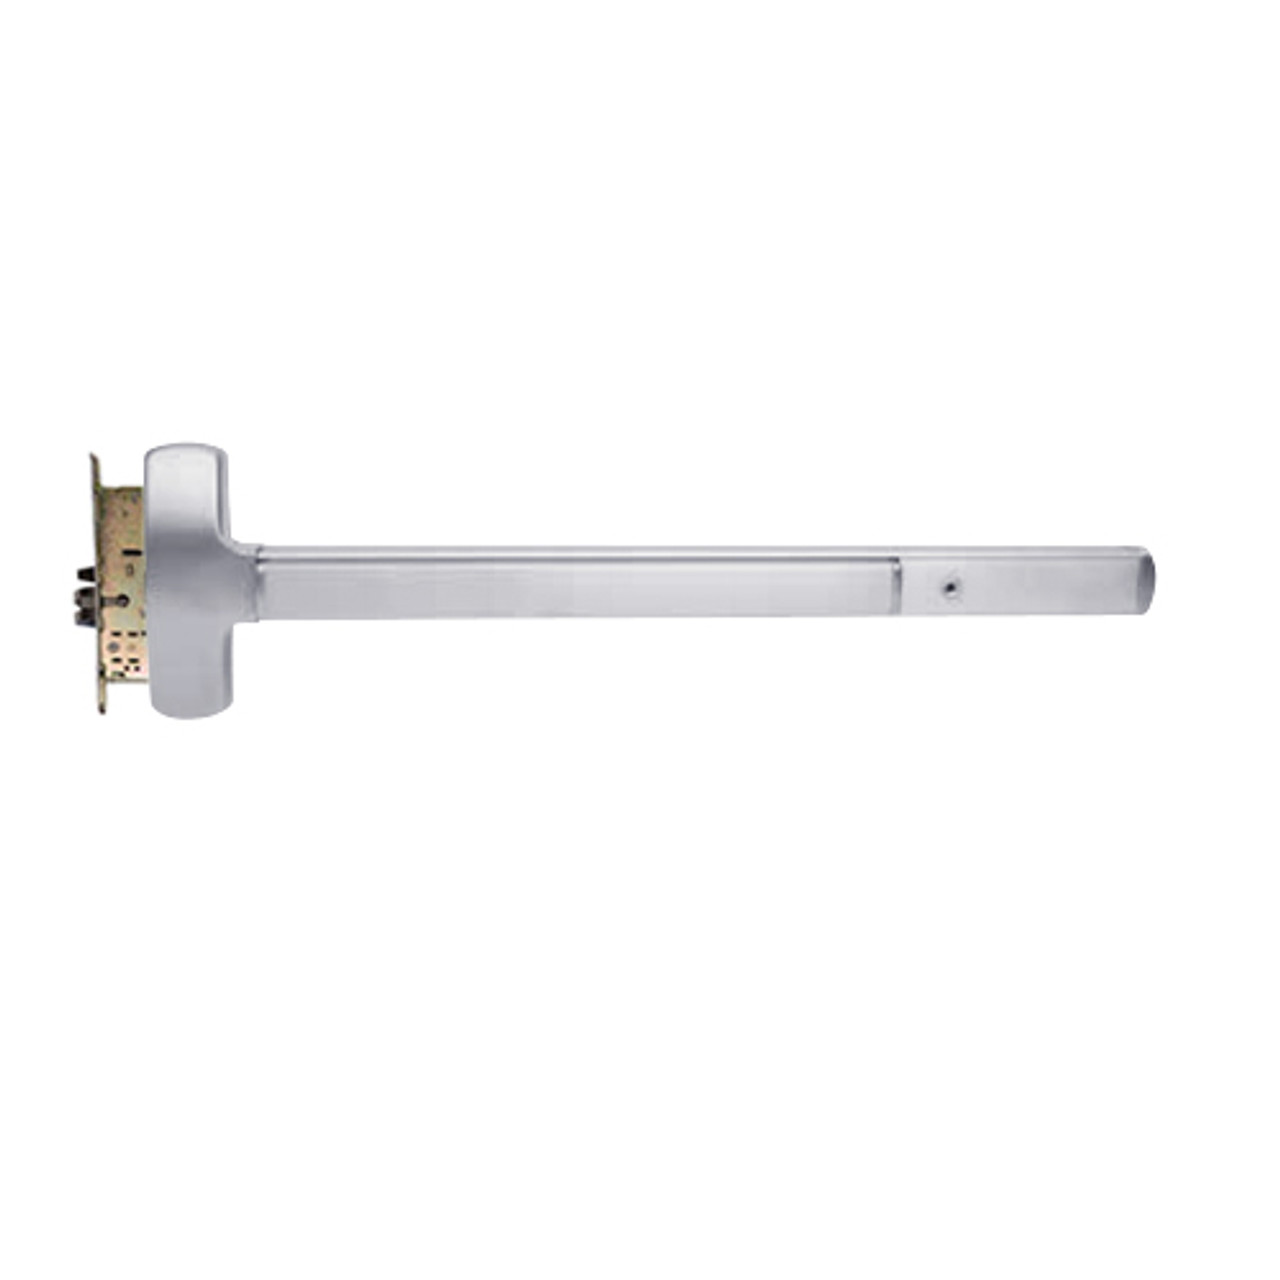 25-M-EO-US32-4-RHR Falcon Exit Device in Polished Stainless Steel